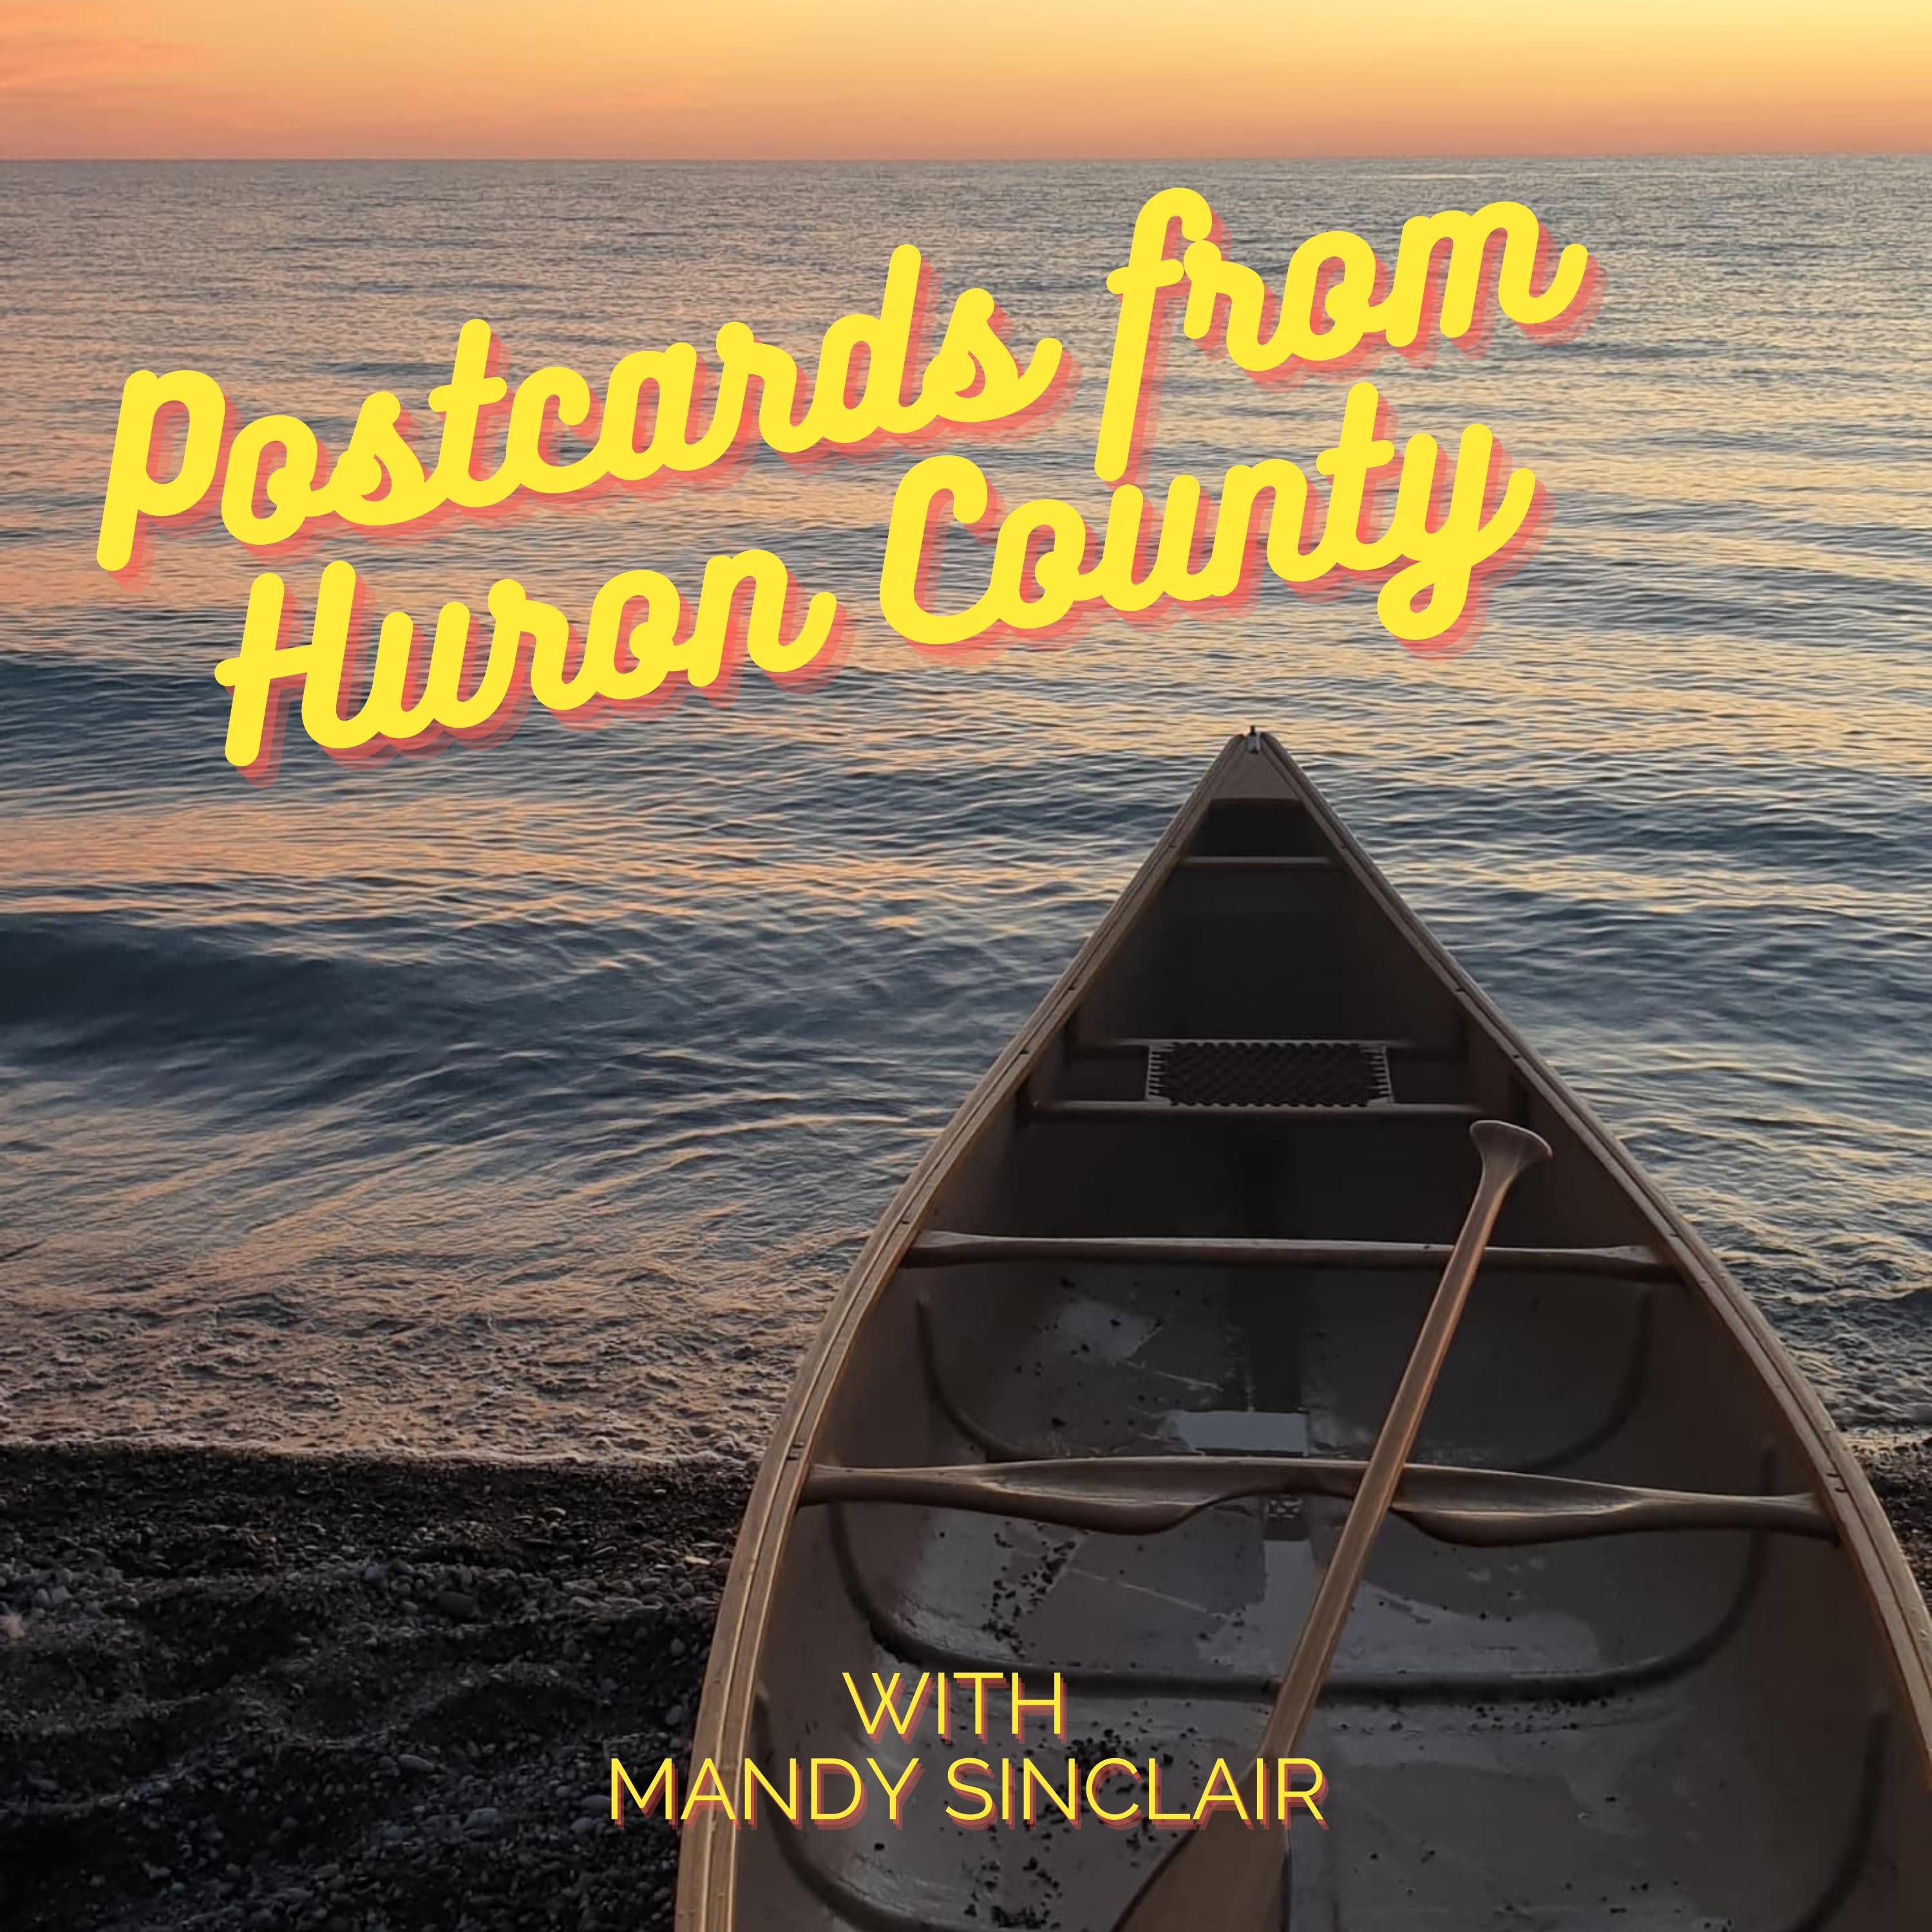 Postcards from Huron County